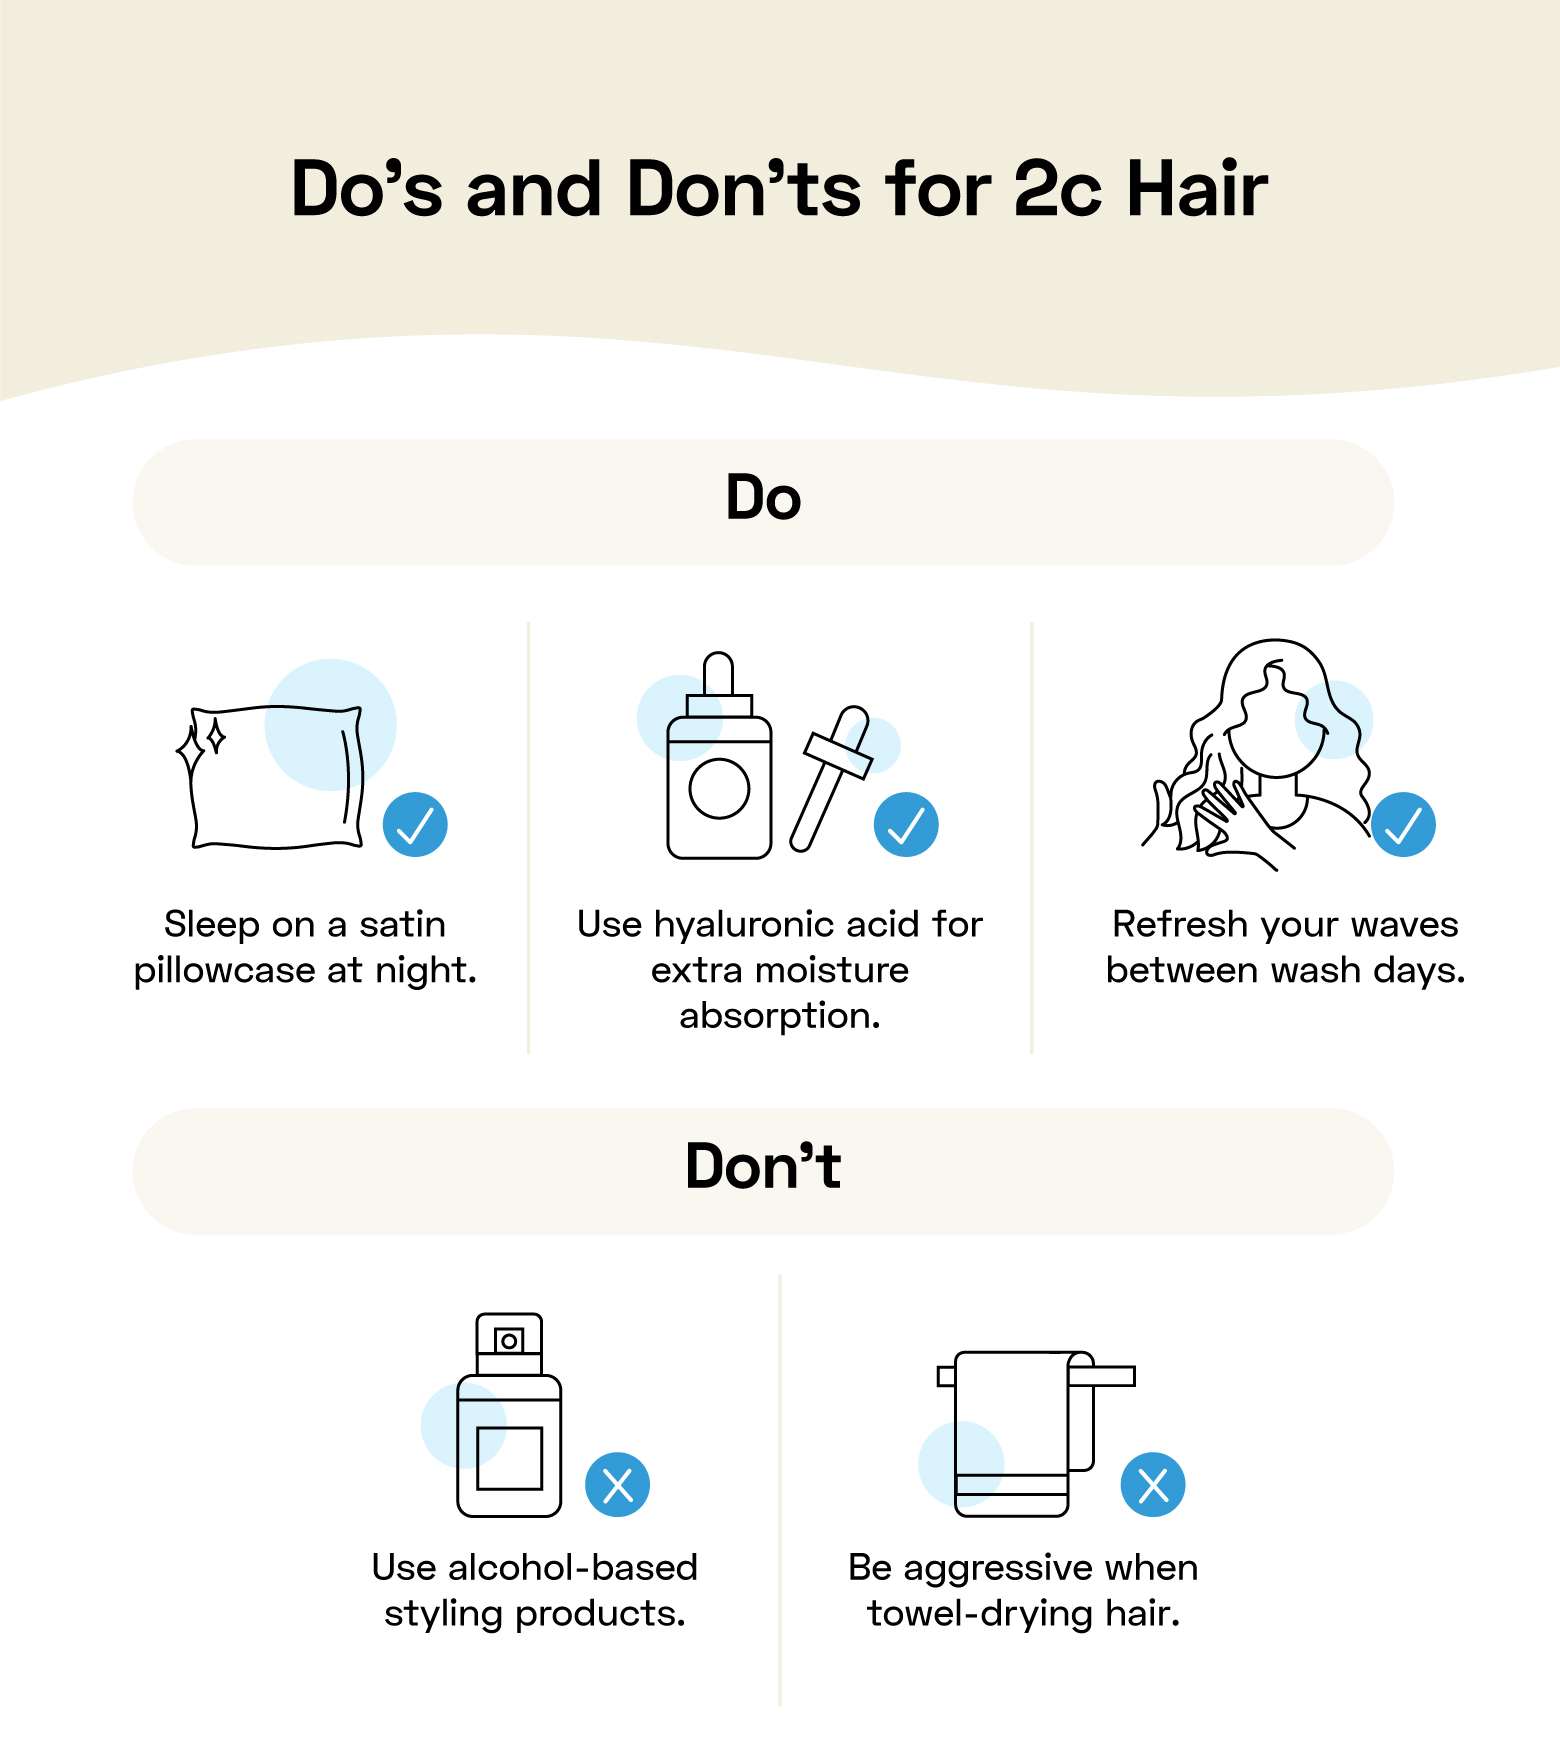 Dos and donts for 2c hair